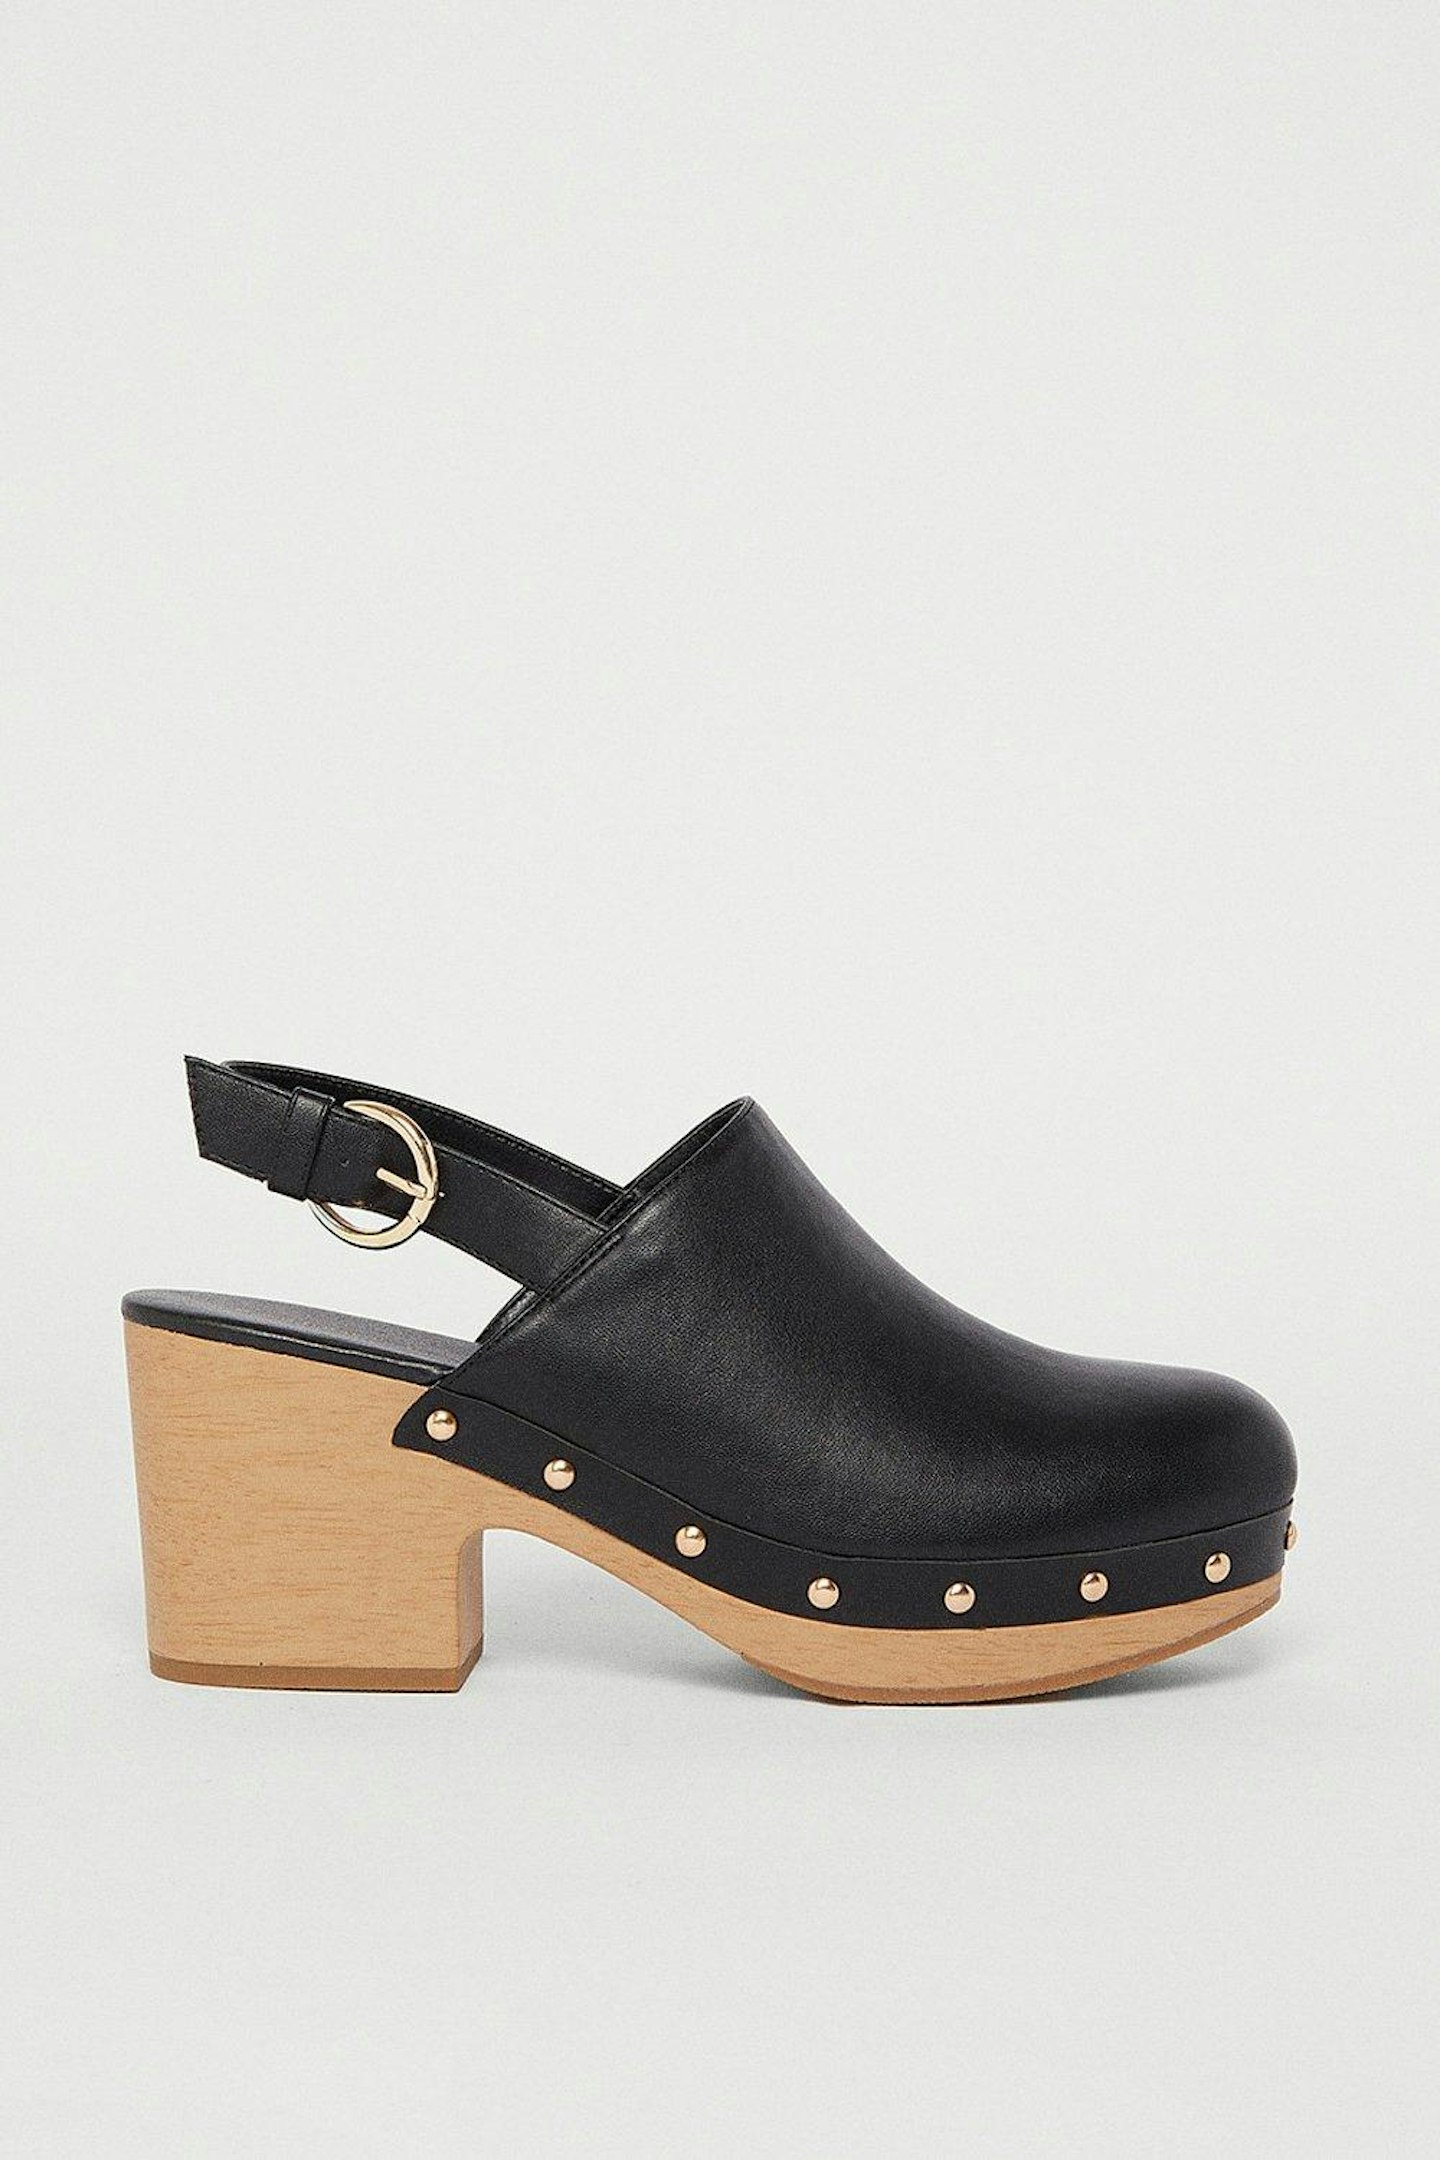 Warehouse, Stud Detail Sling Back Clog, WAS £59 NOW £24